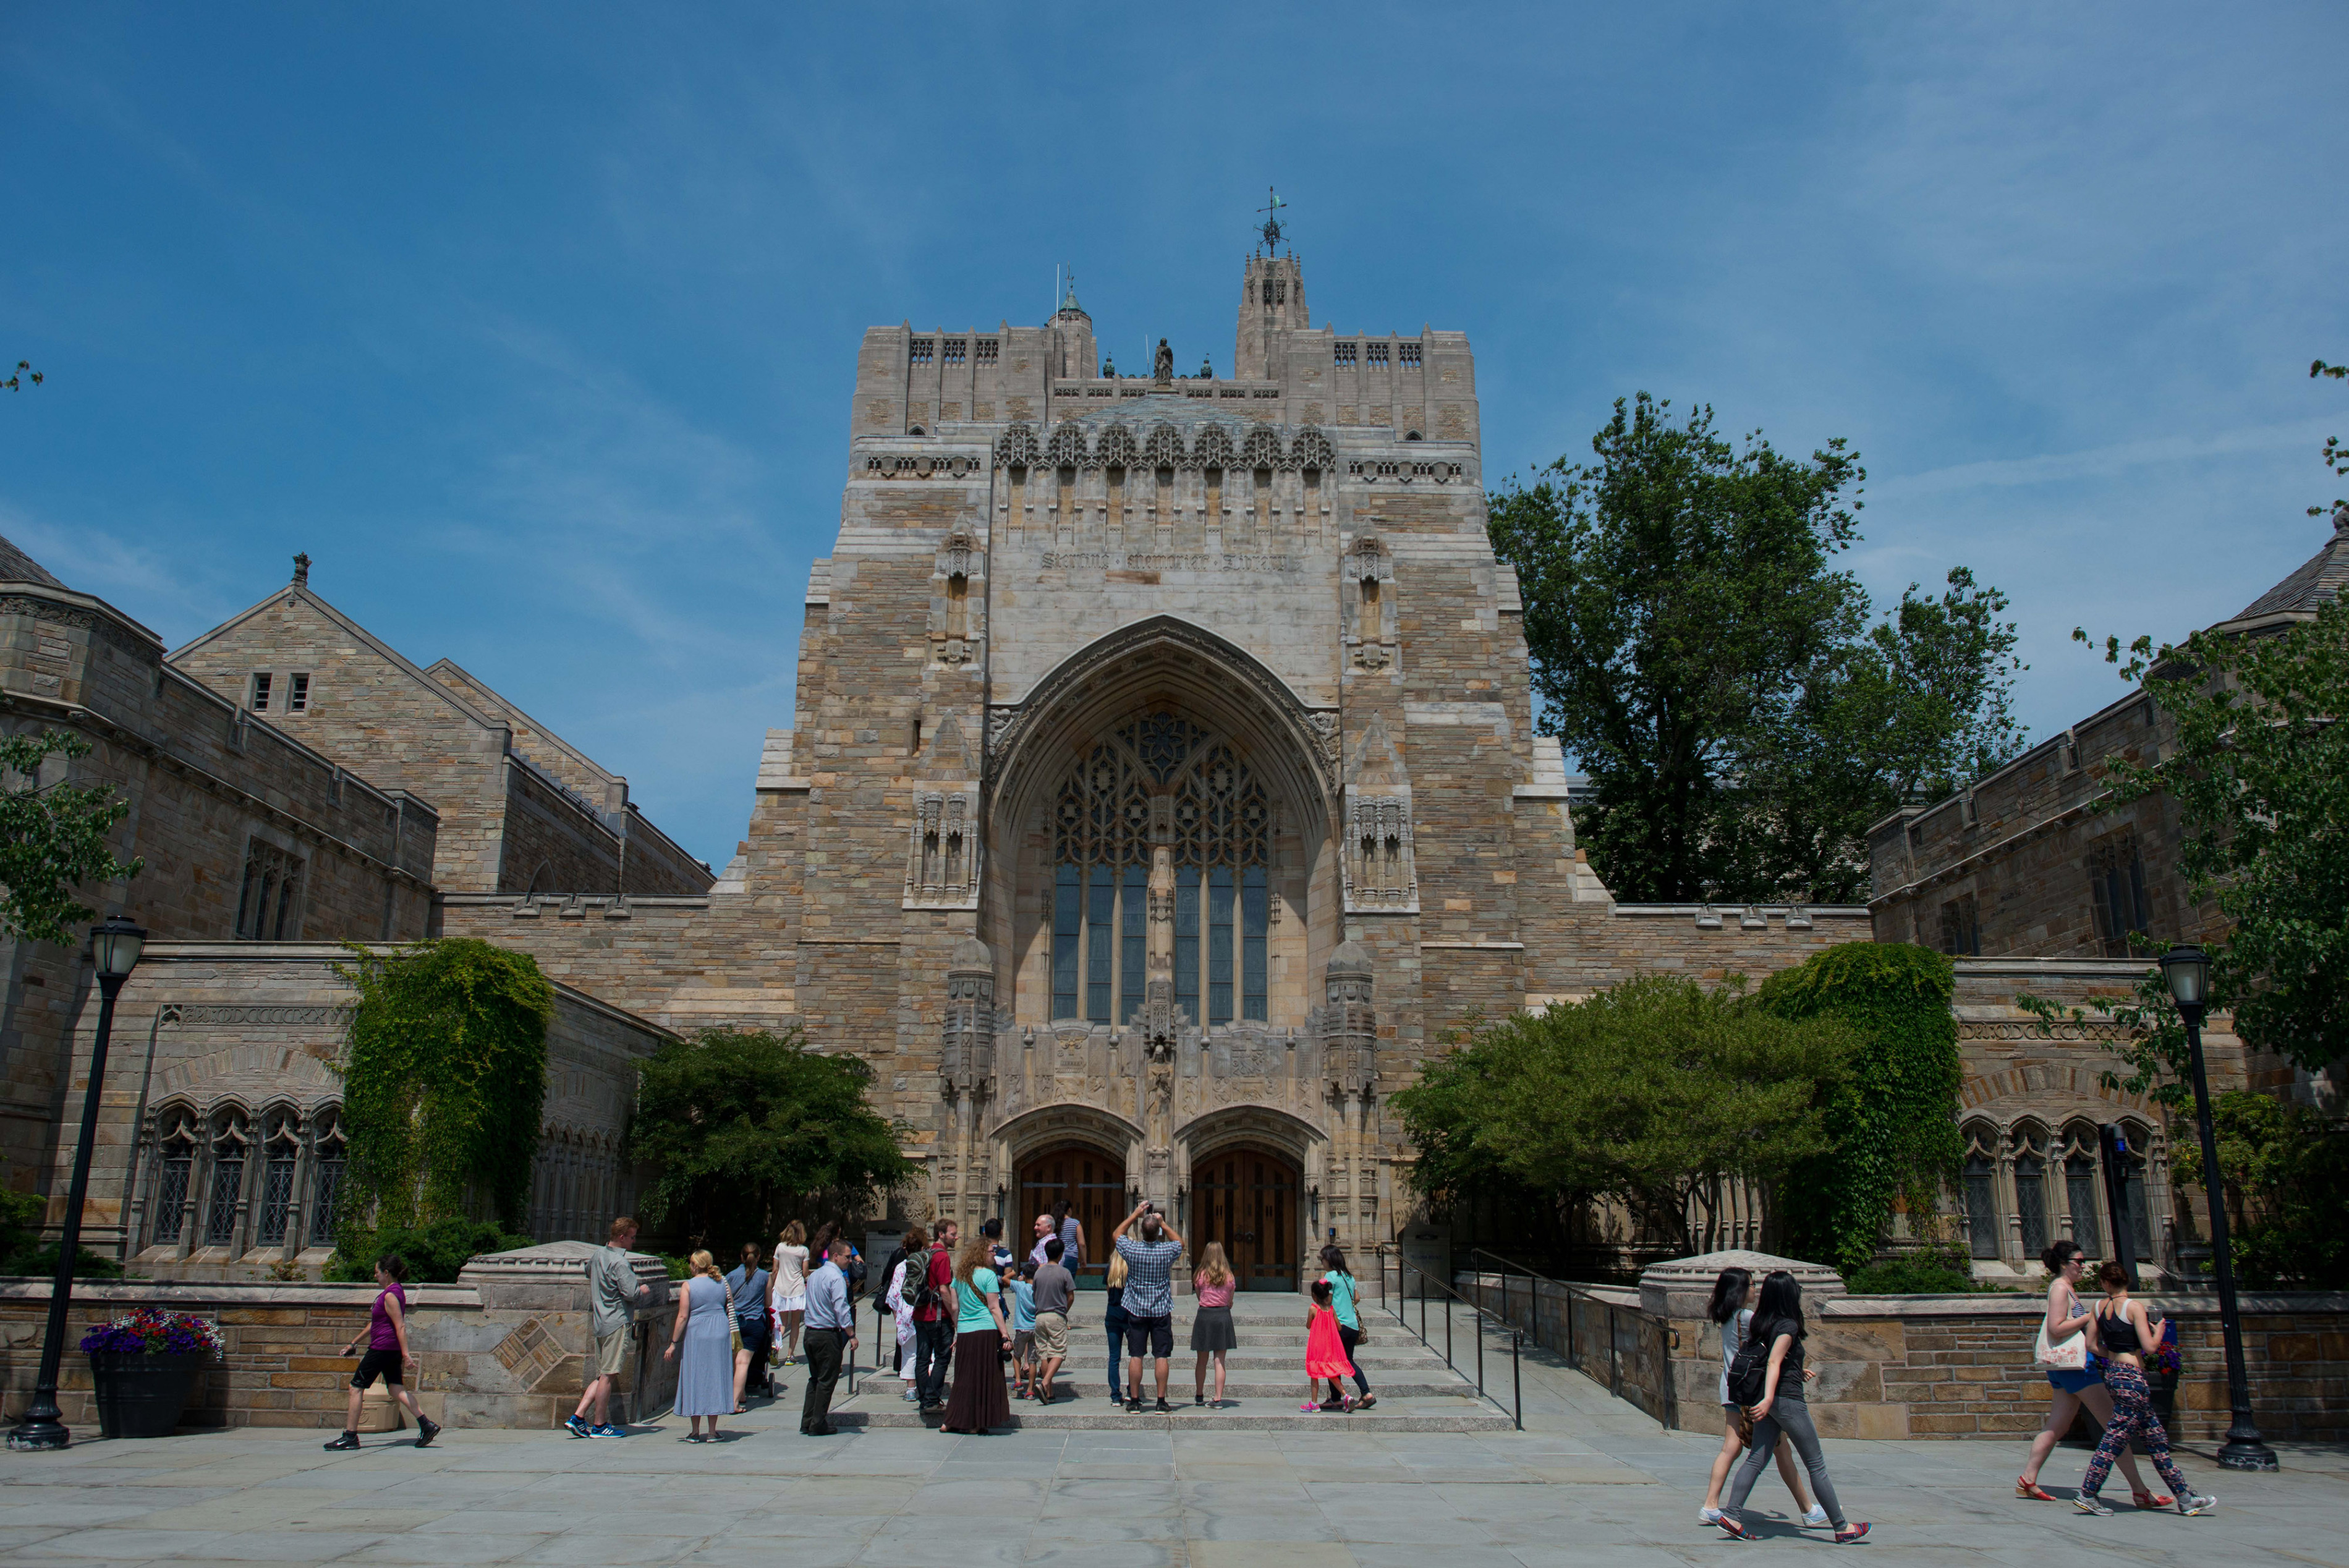 A tour group makes a stop at the Sterling Memorial Library on the Yale University campus in New Haven, Conn., on June 12, 2015. (Bloomberg via Getty Images)